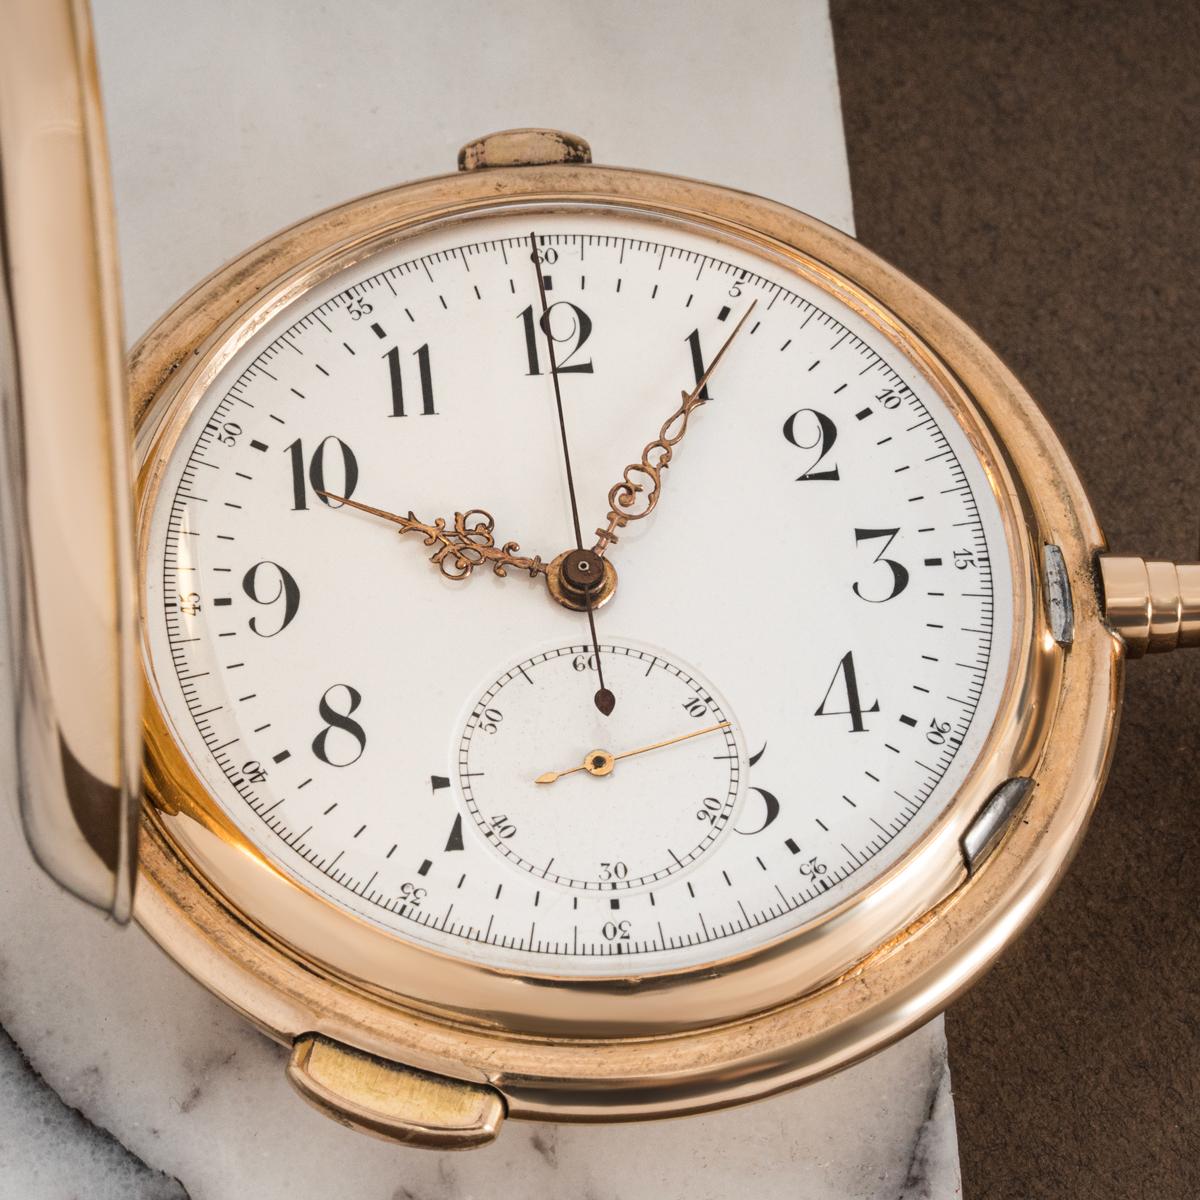 A Rose Gold Quarter Repeater Chronograph Keyless Lever Full Hunter Pocket Watch C1896.

Dial: The perfect white enamel dial with Arabic numerals outer minute track, subsidiary seconds dial at six o'clock, with rose gold coloured Louis XVI style